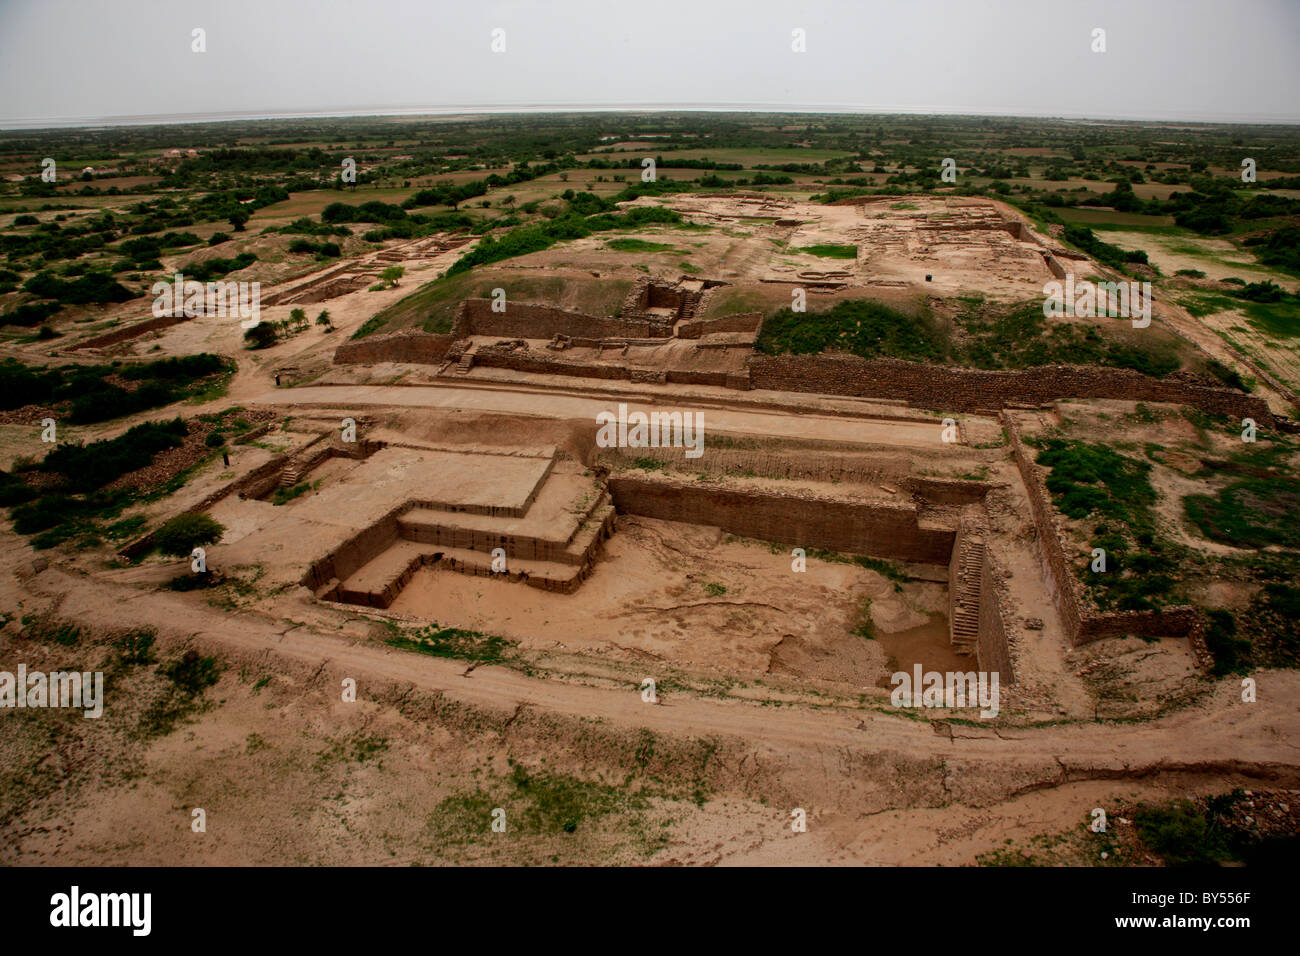 Aerial picture of ruins of Harappan civilization city in Dholavira, Gujarat, India Stock Photo